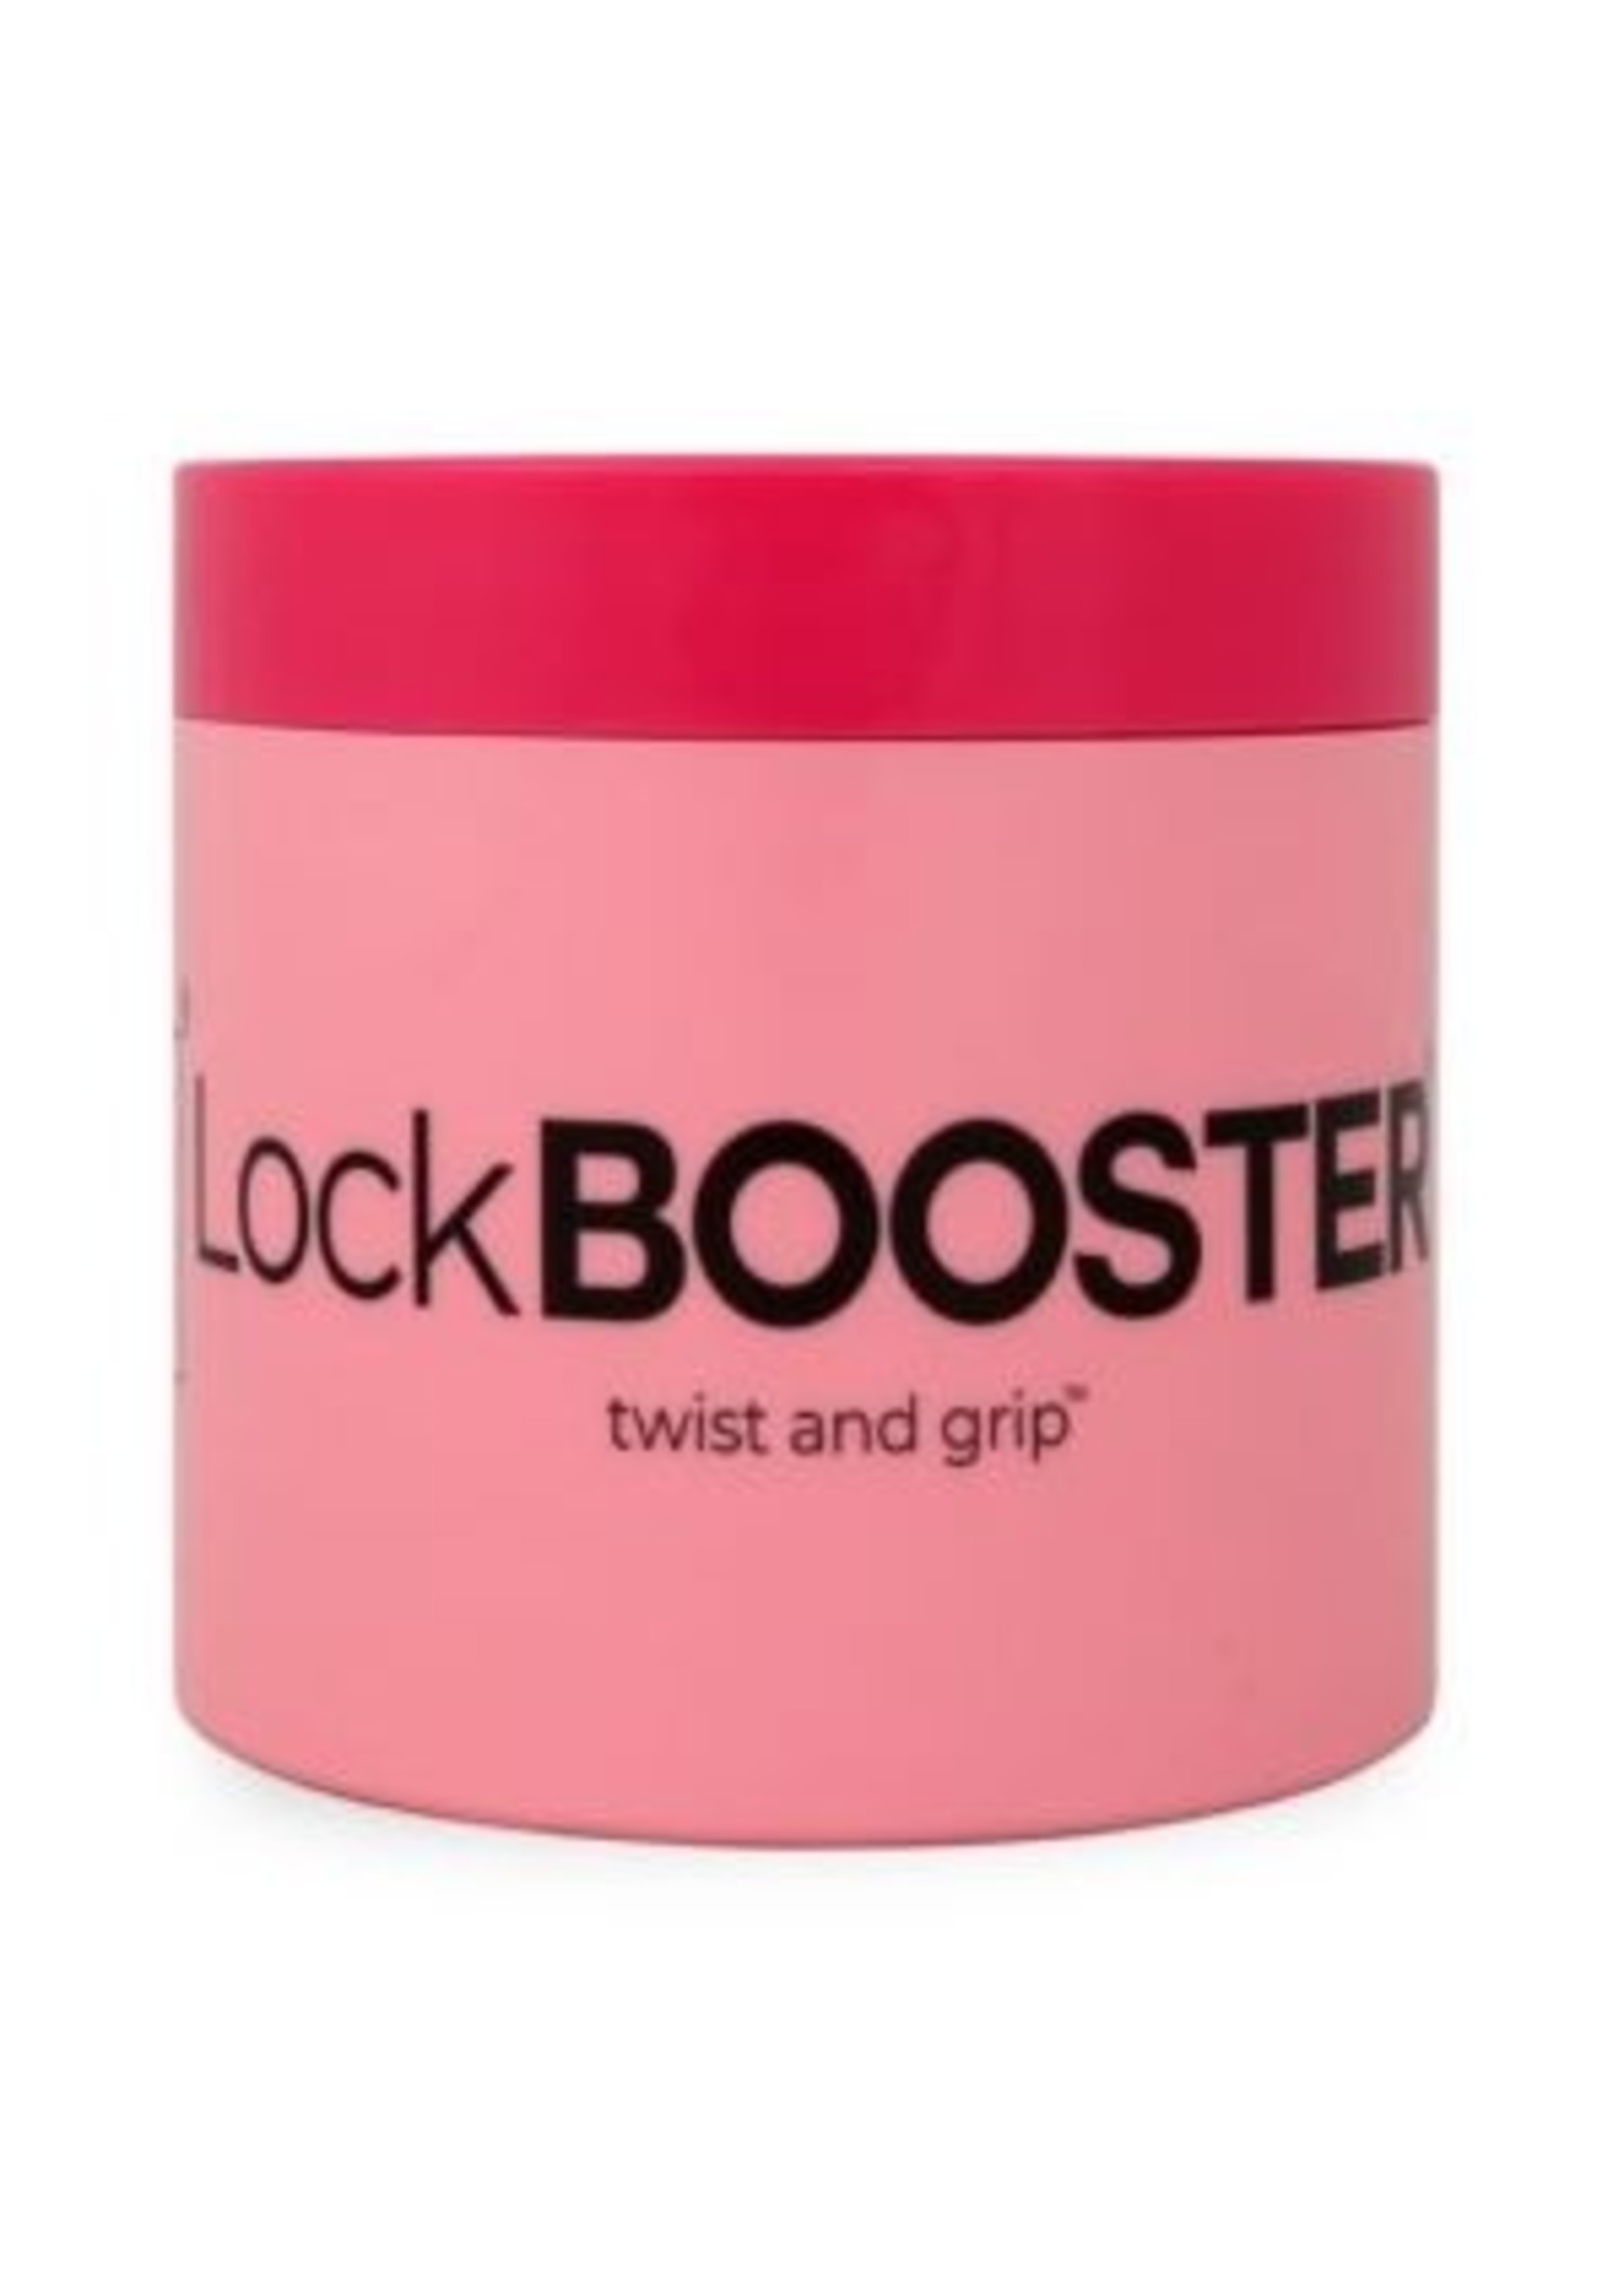 Edge Booster Lock Booster Rose Hip Oil Pink Top